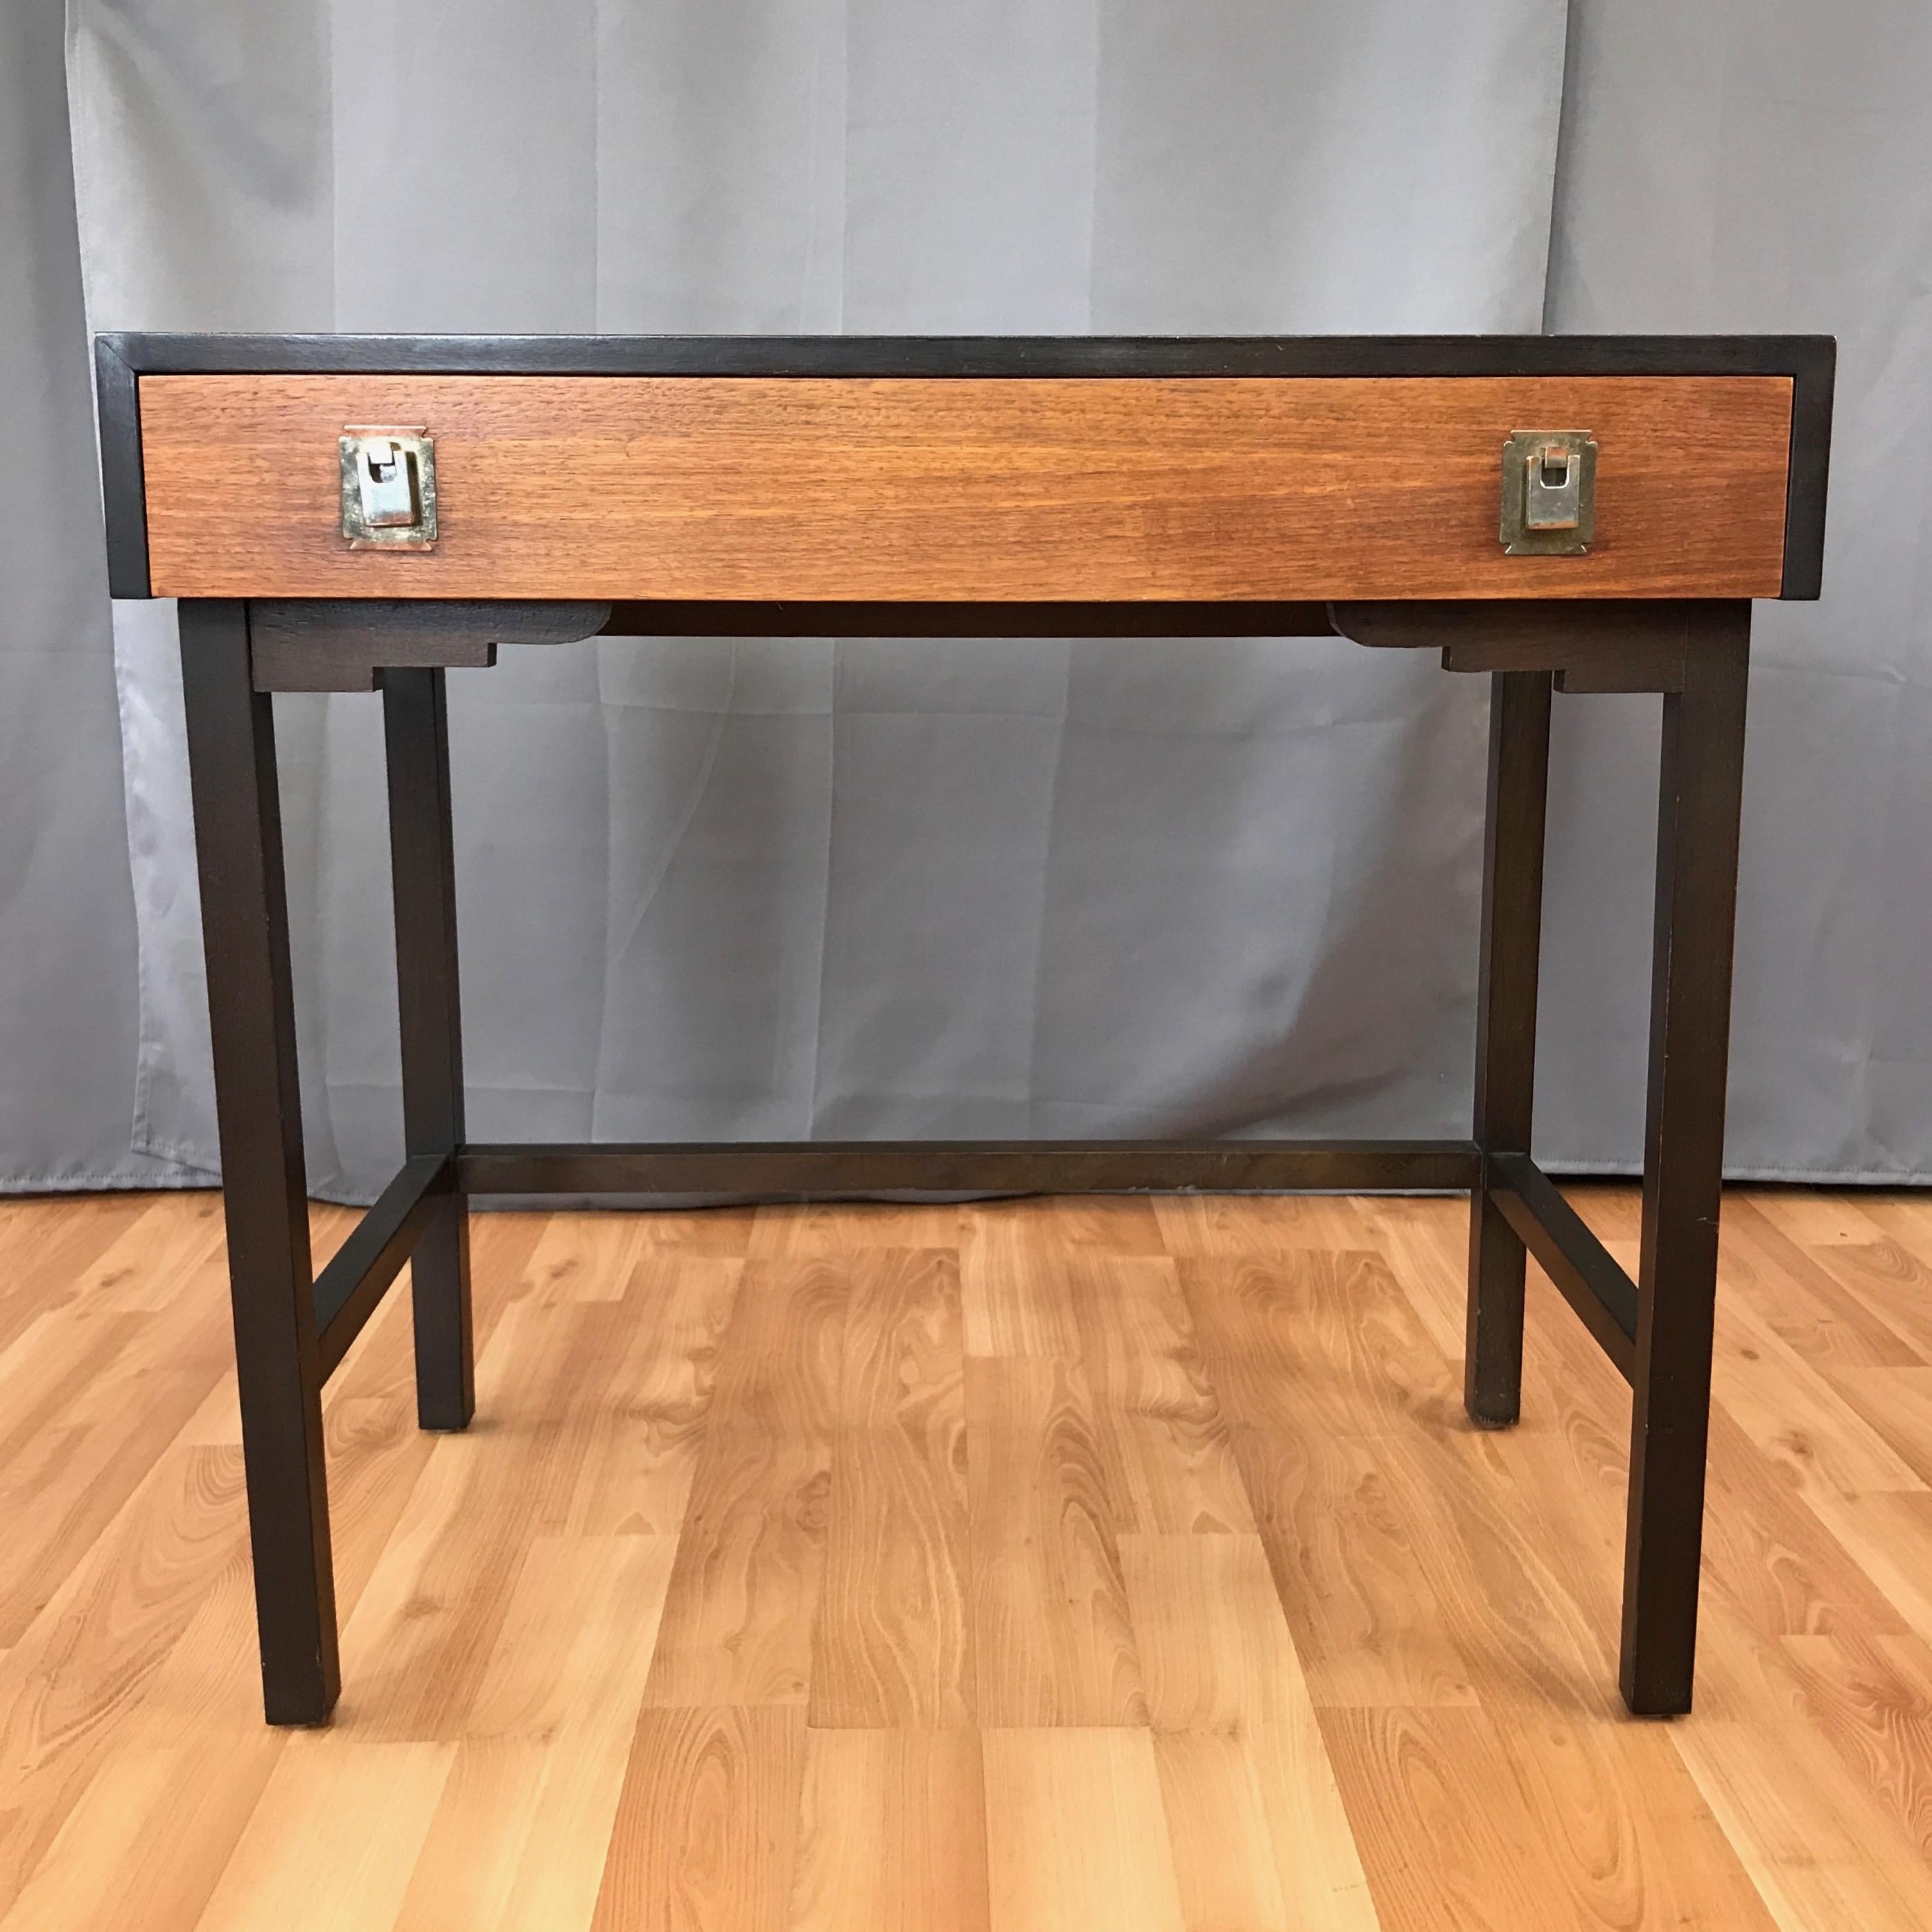 A 1950s elm vanity or small desk with drawer, made in Japan.

Has a clean Mid-Century Modern design that would complement pieces by McCobb, Knoll, and Nelson, with a few Asian-style touches that set it apart.

Features a three-tone finish—caramel